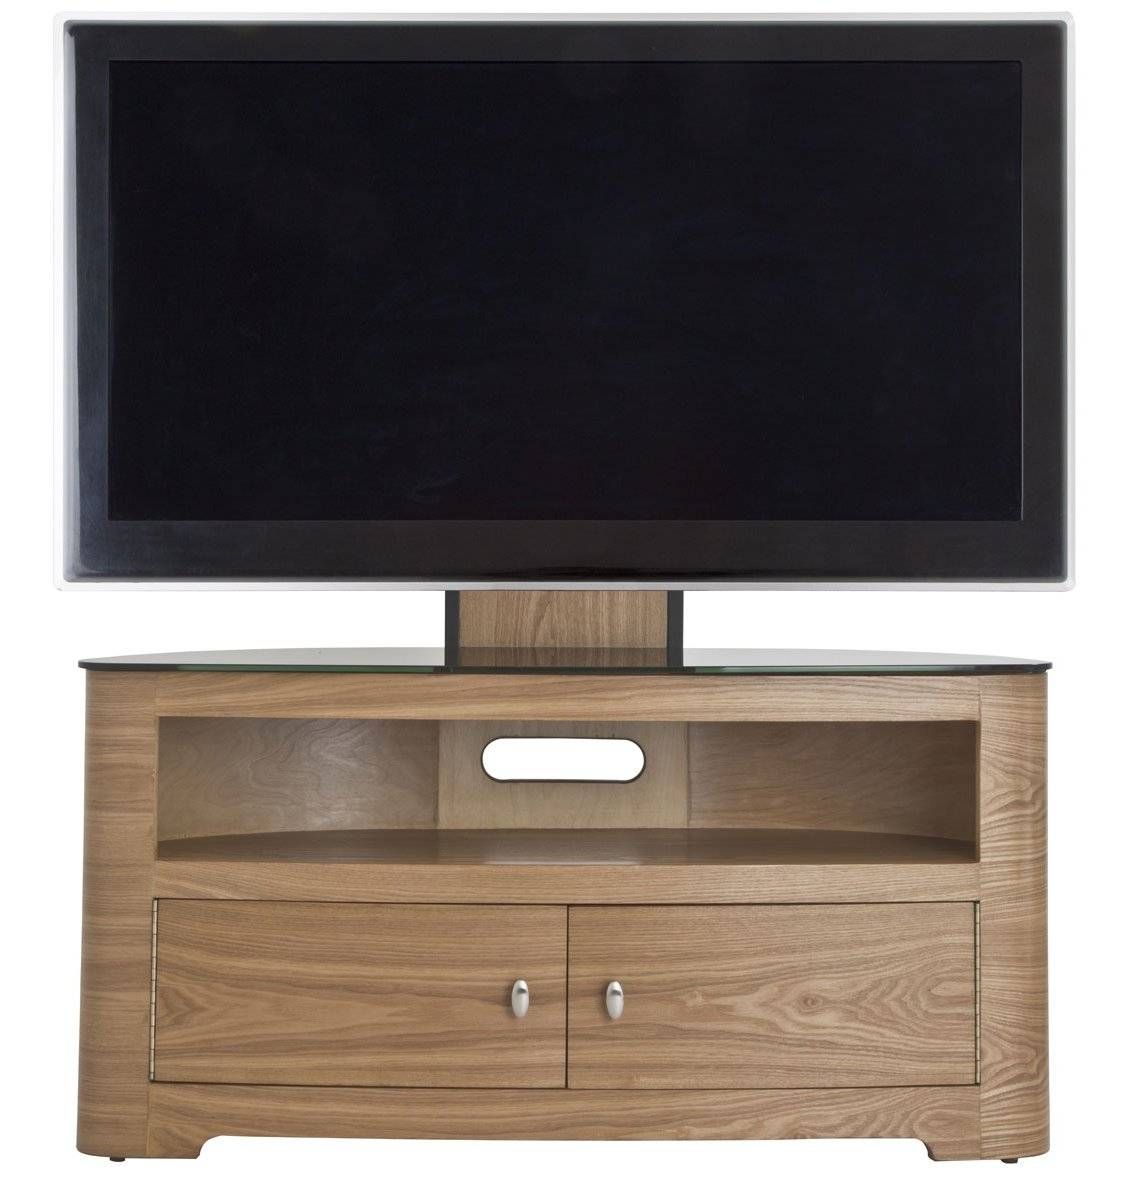 Brown Varnished Maple Wood Tv Stand With Mount Using Double Swing Regarding Maple Wood Tv Stands (View 5 of 15)